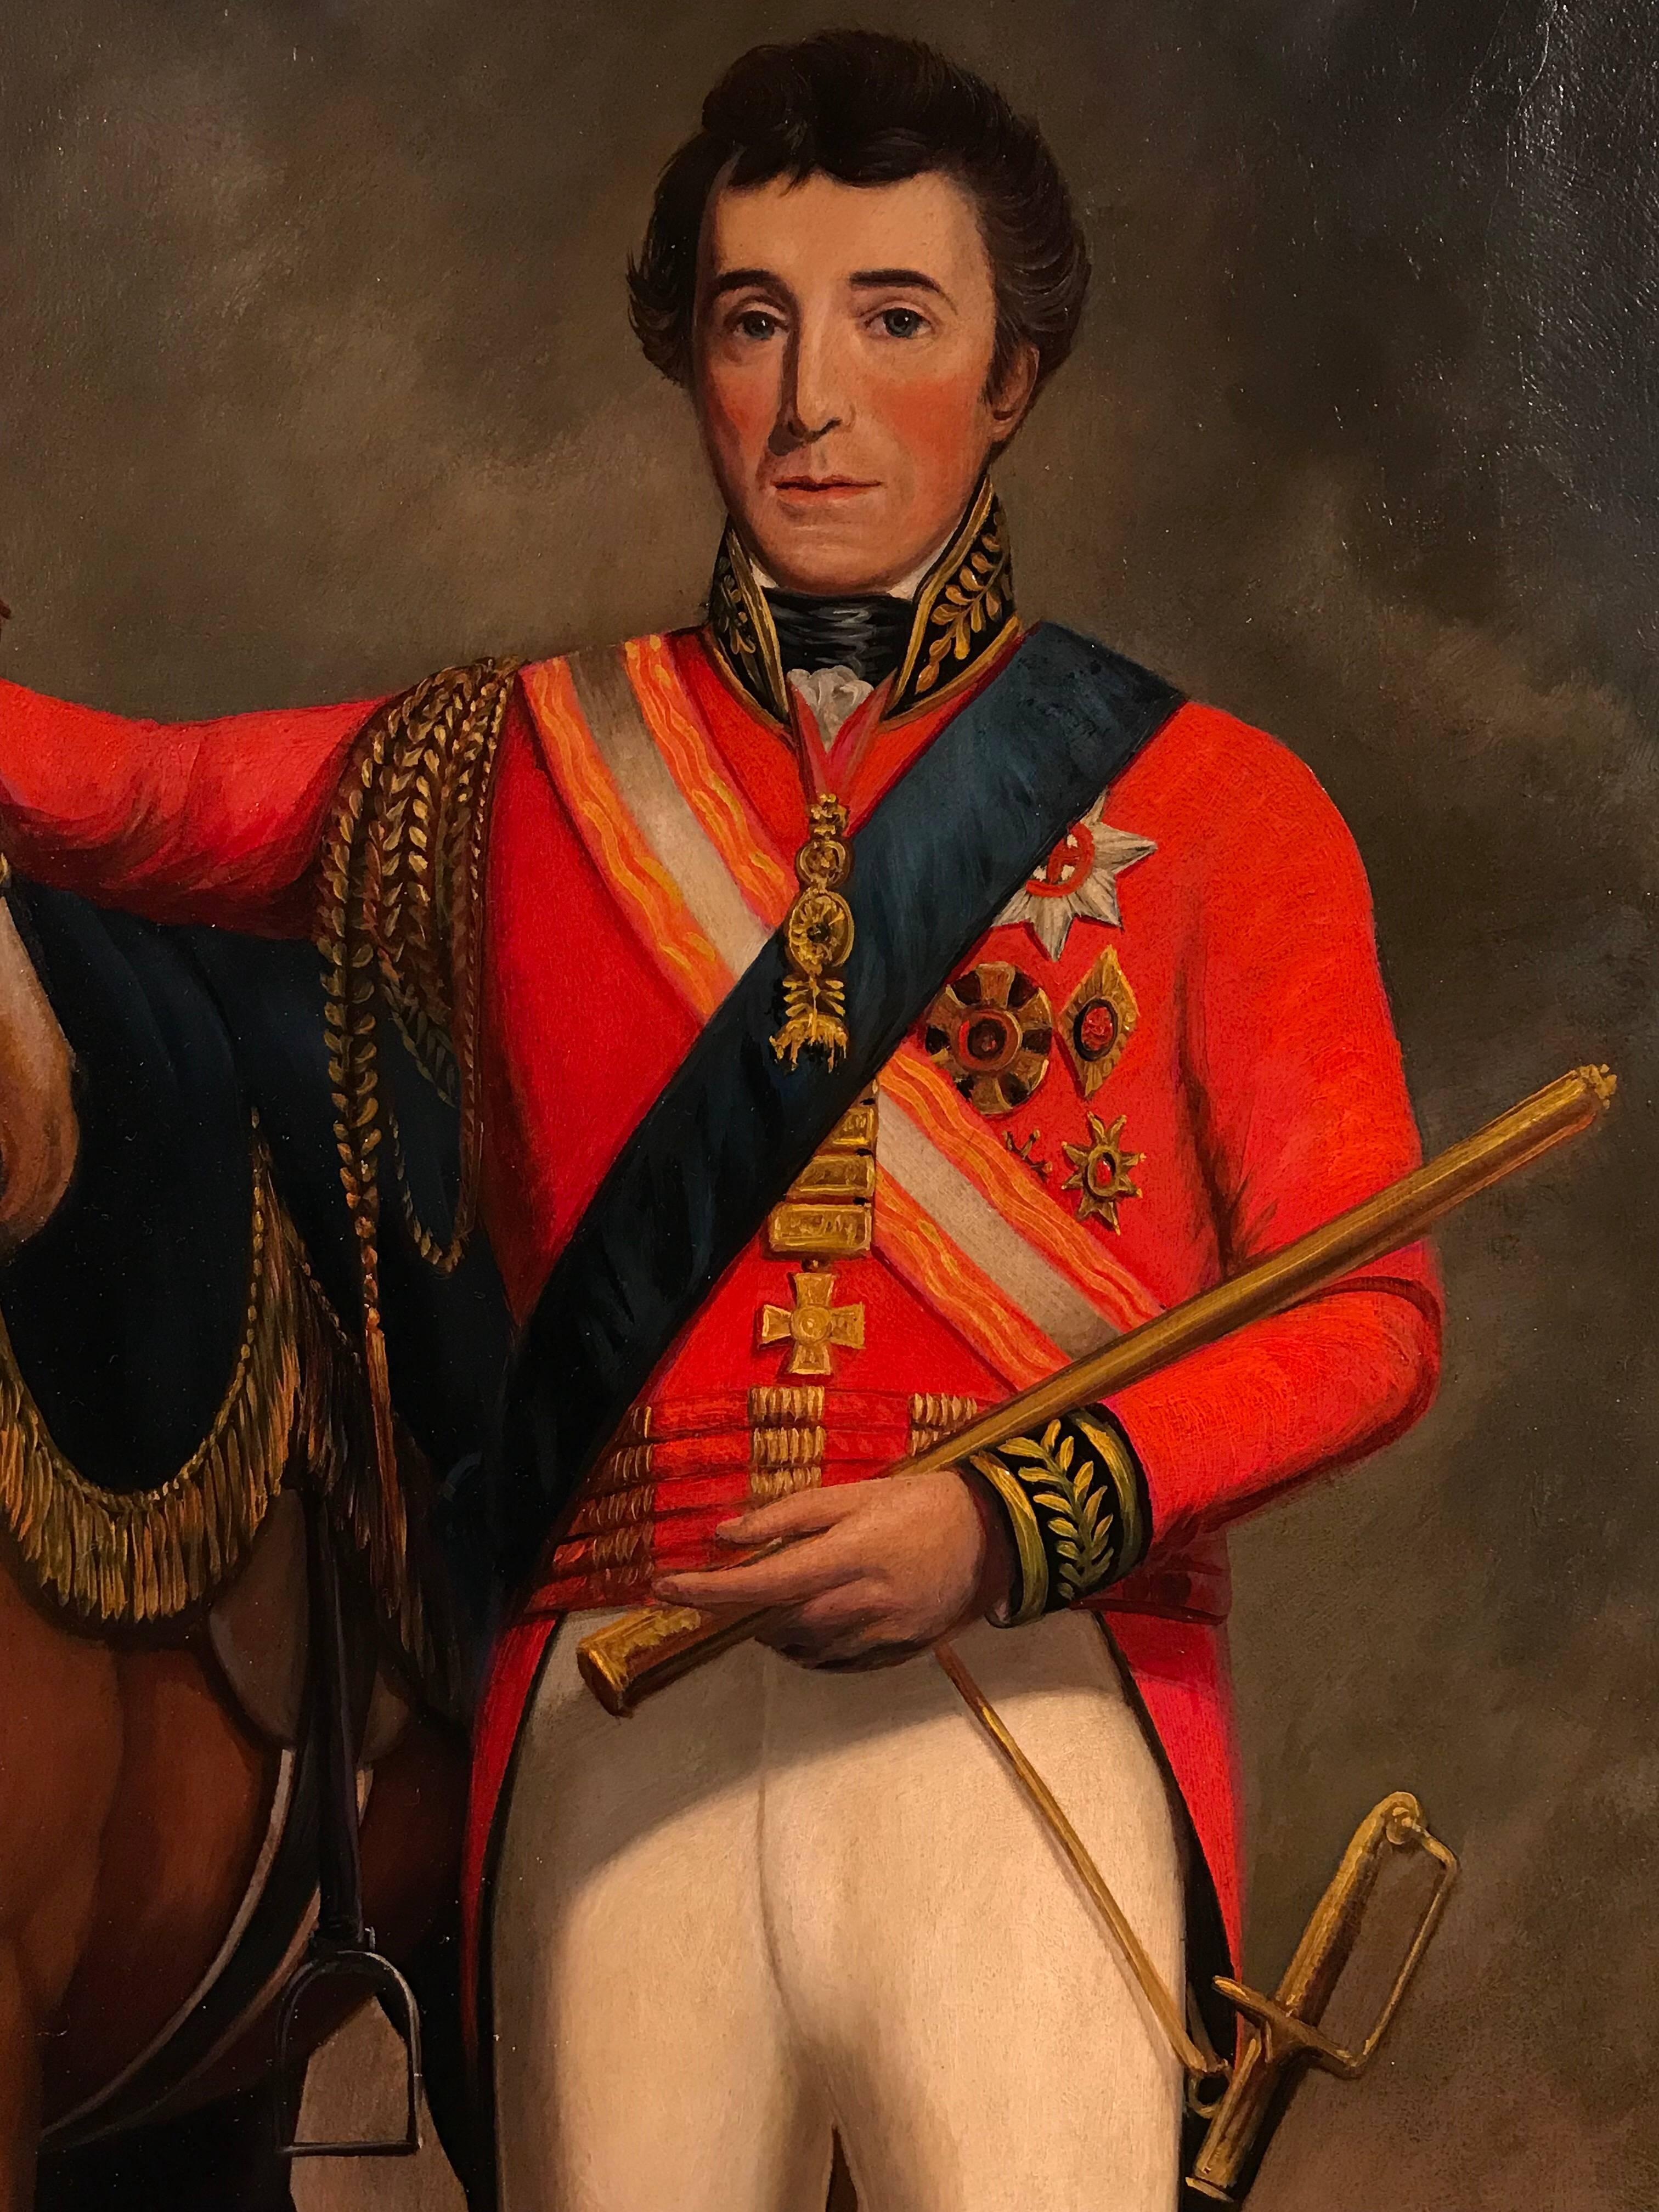 Very fine antique oil painting on canvas, depicting Arthur Wellesley, 1st. Duke of Wellington. He stands beside his favourite charger whilst soldiers can be seen in the background in battle. 

The painting itself dates to the mid 19th century and is